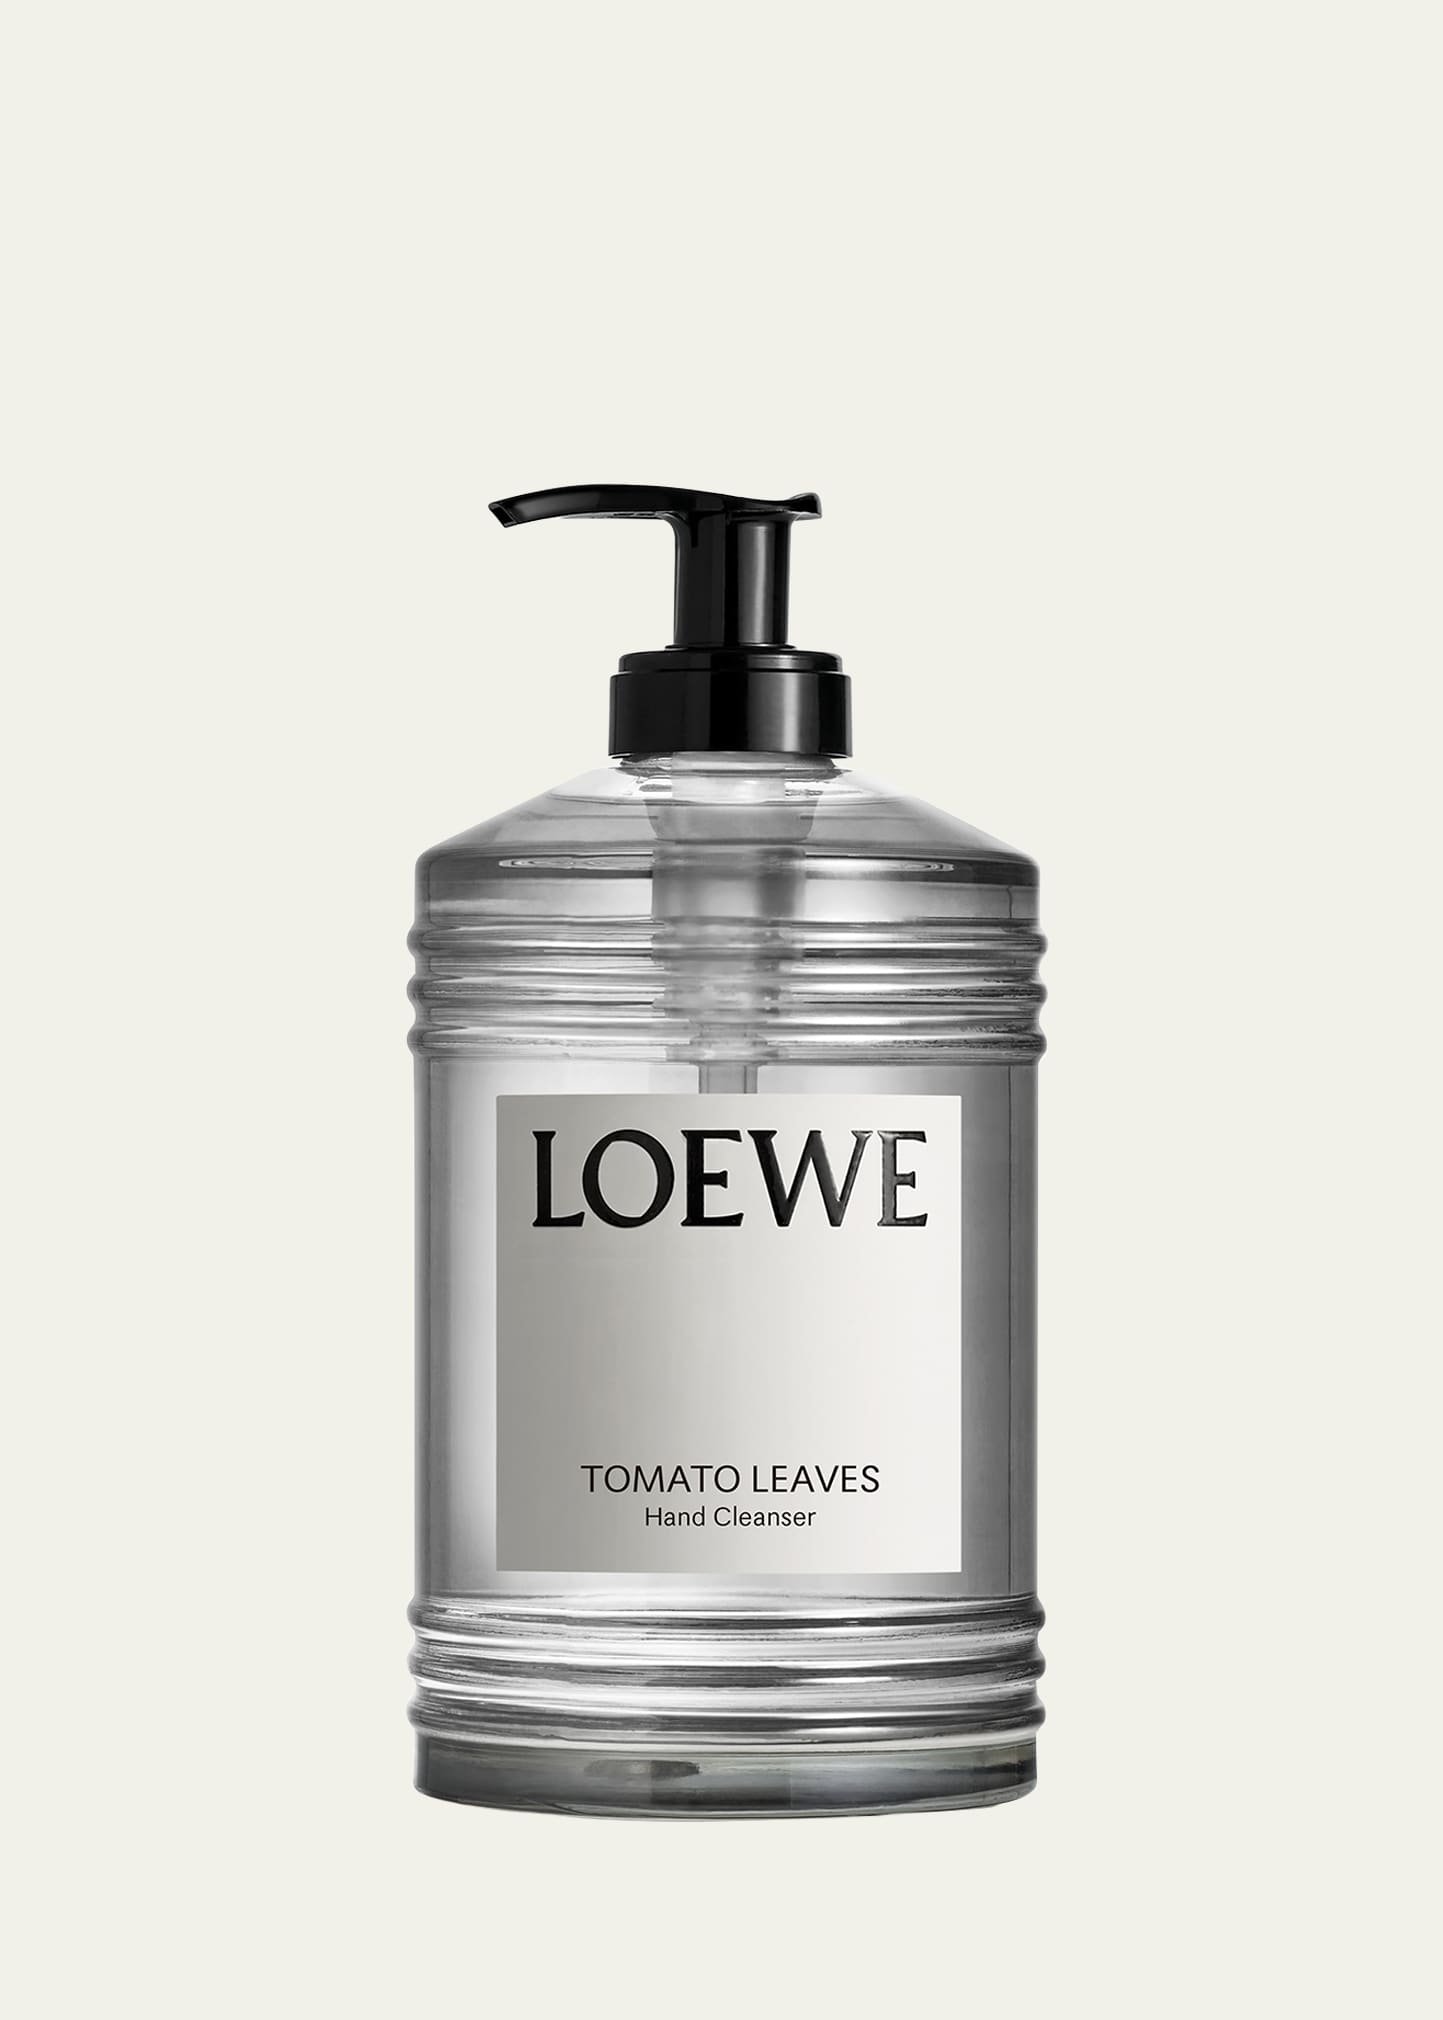 Tomato Leaves Hand Cleanser, 12 oz.